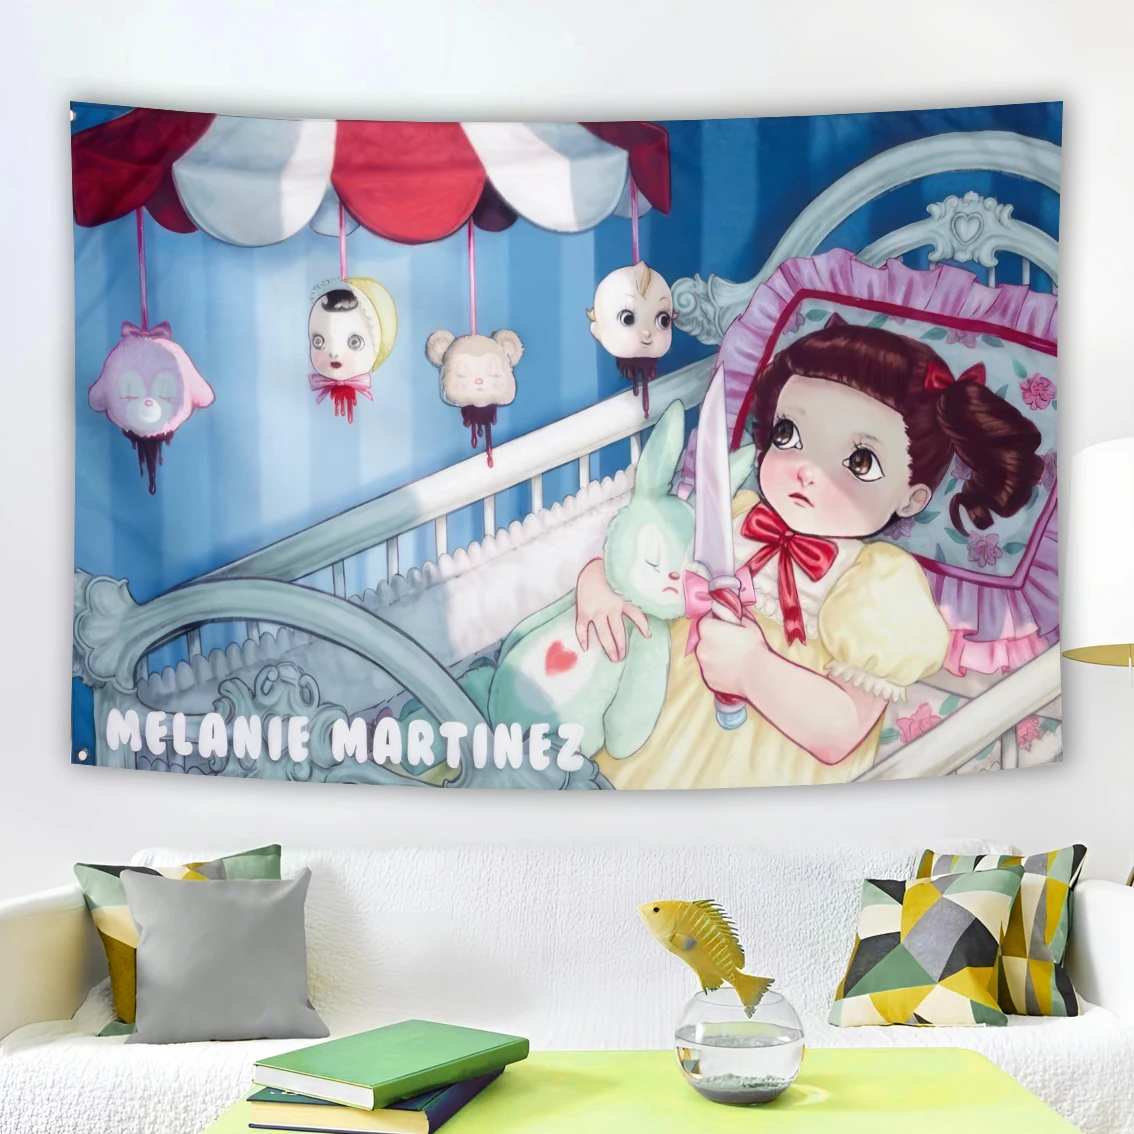 90x150 Melanie Martinezs Flag Crying Child Tapestry Home Decorating Room Cute Girl